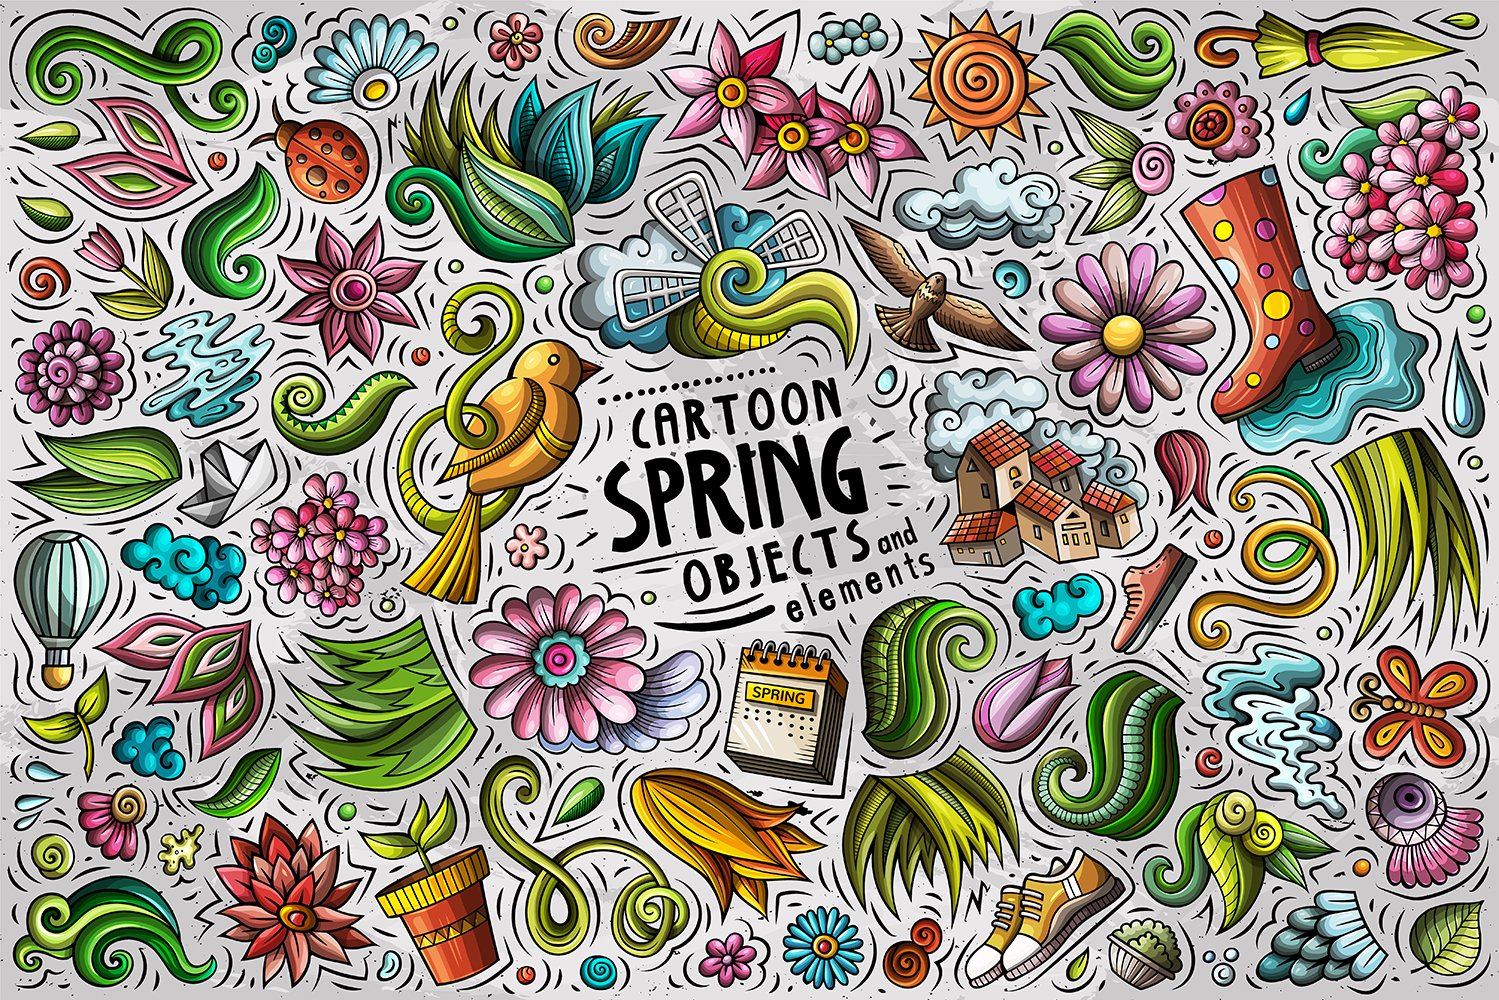 Spring Season Cartoon Objects and Symbols Collection - Design Cuts